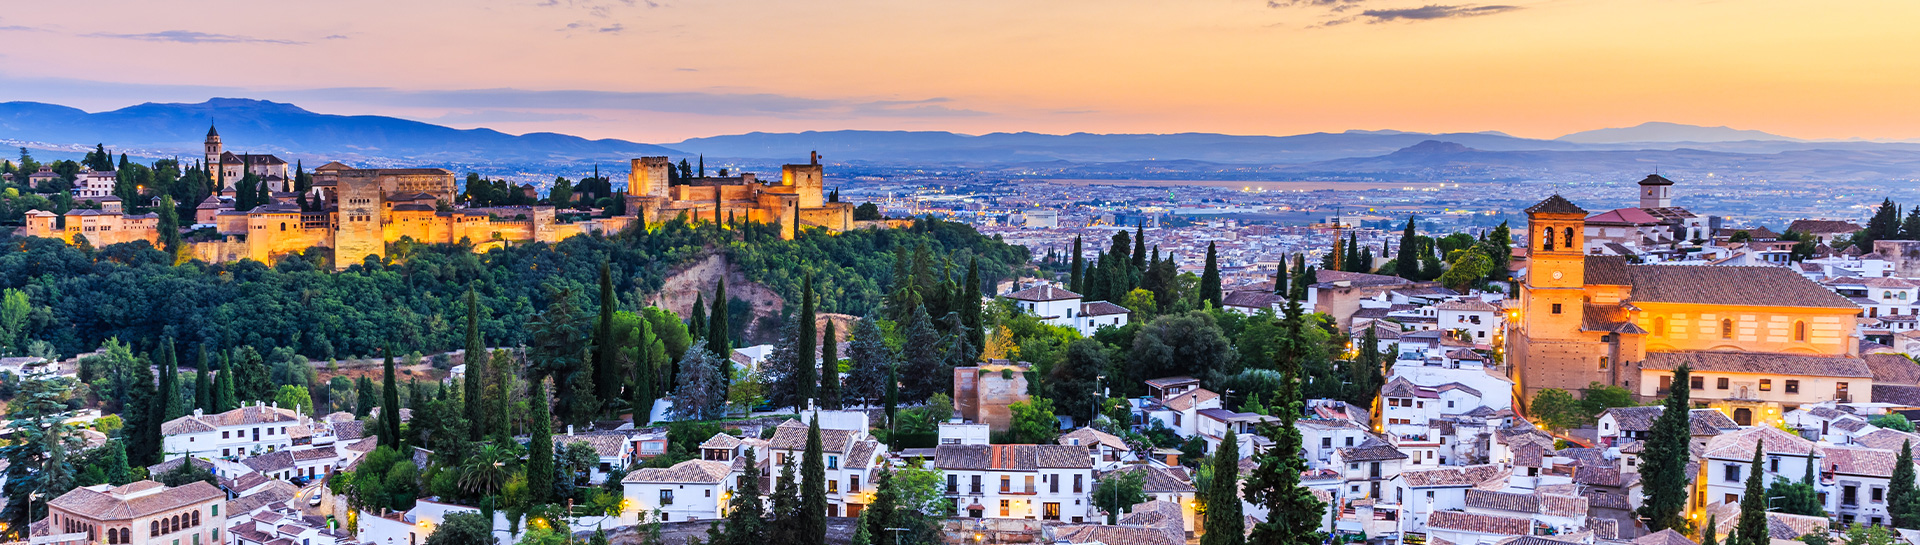 Granada, information about this popular destination in Spain by the AFRICA MOROCCO LINK company.